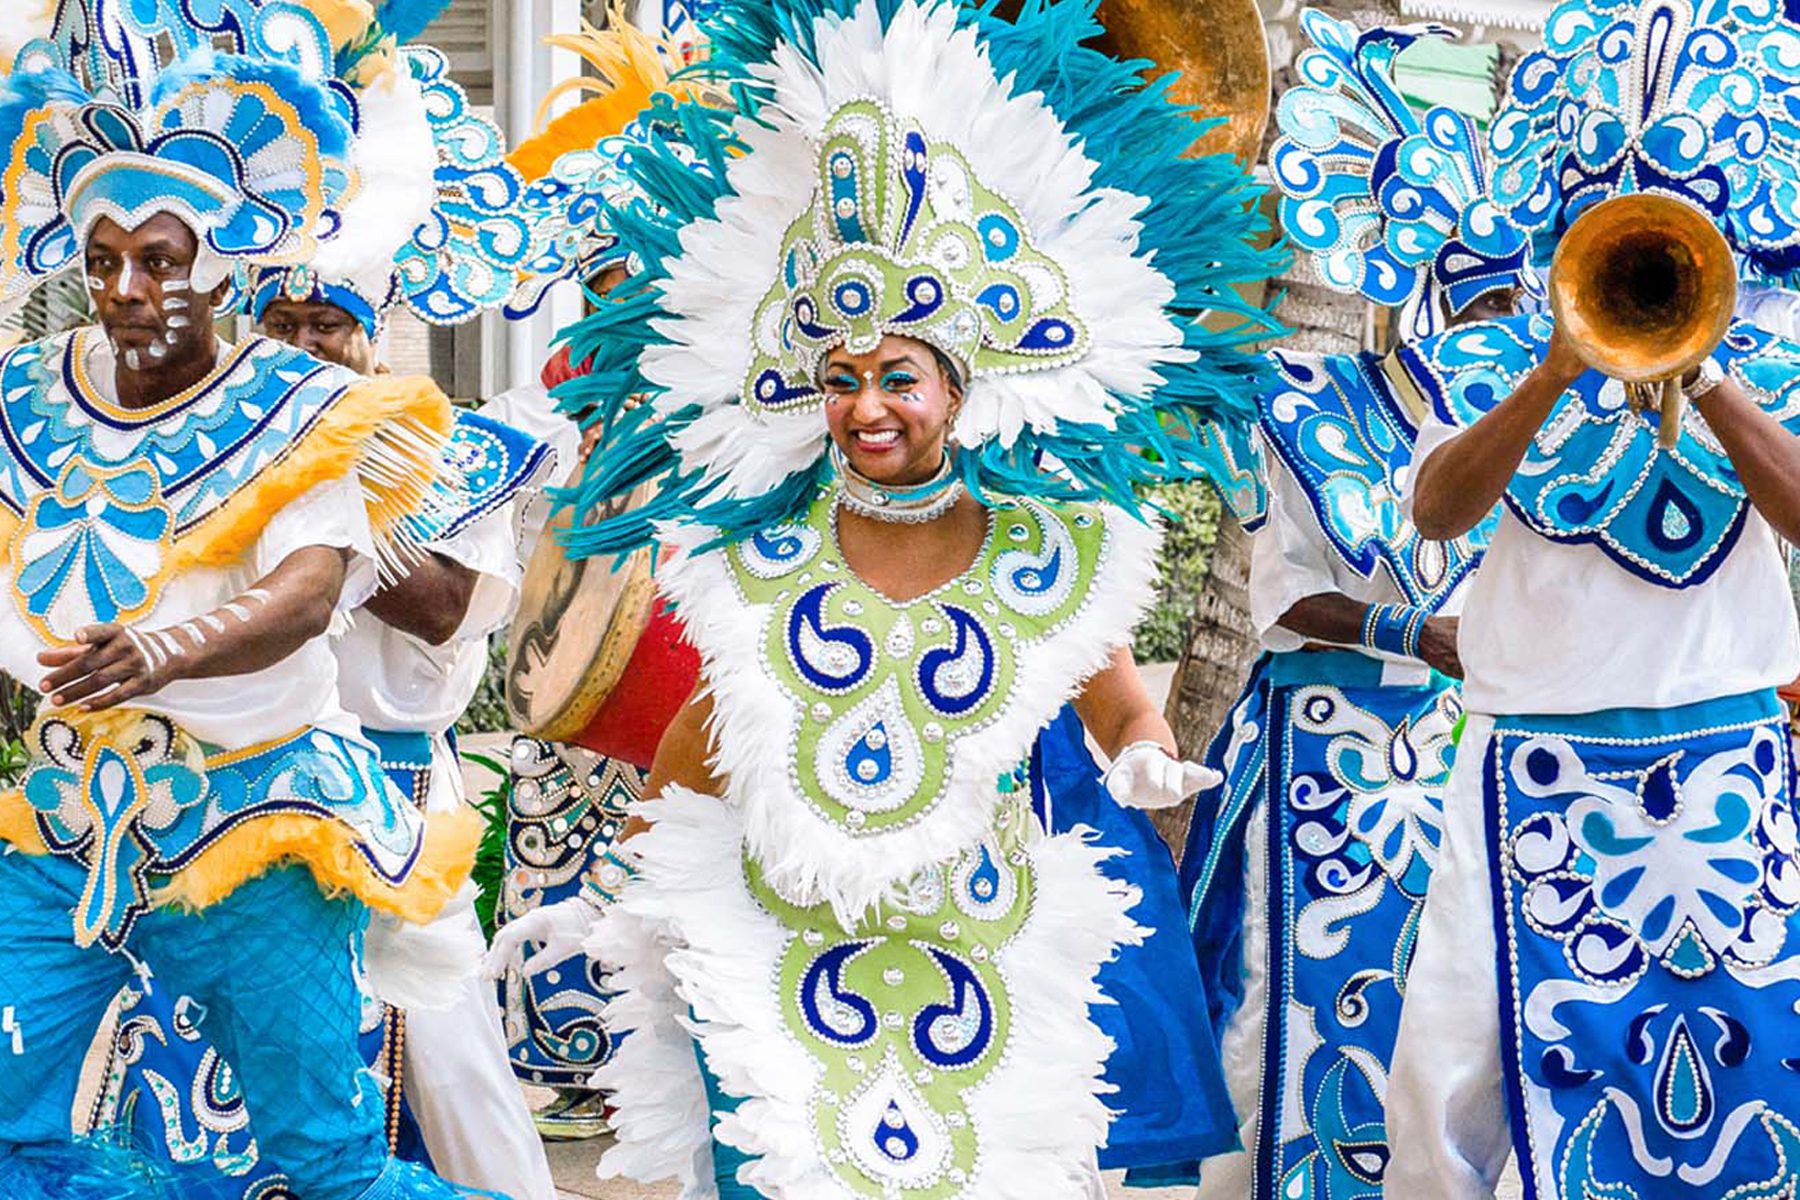 A colorful Junkanoo dancer wearing white feathers and green and blue regalia, with several Junkanoo musicians behind them, celebrating in the Bahamas.